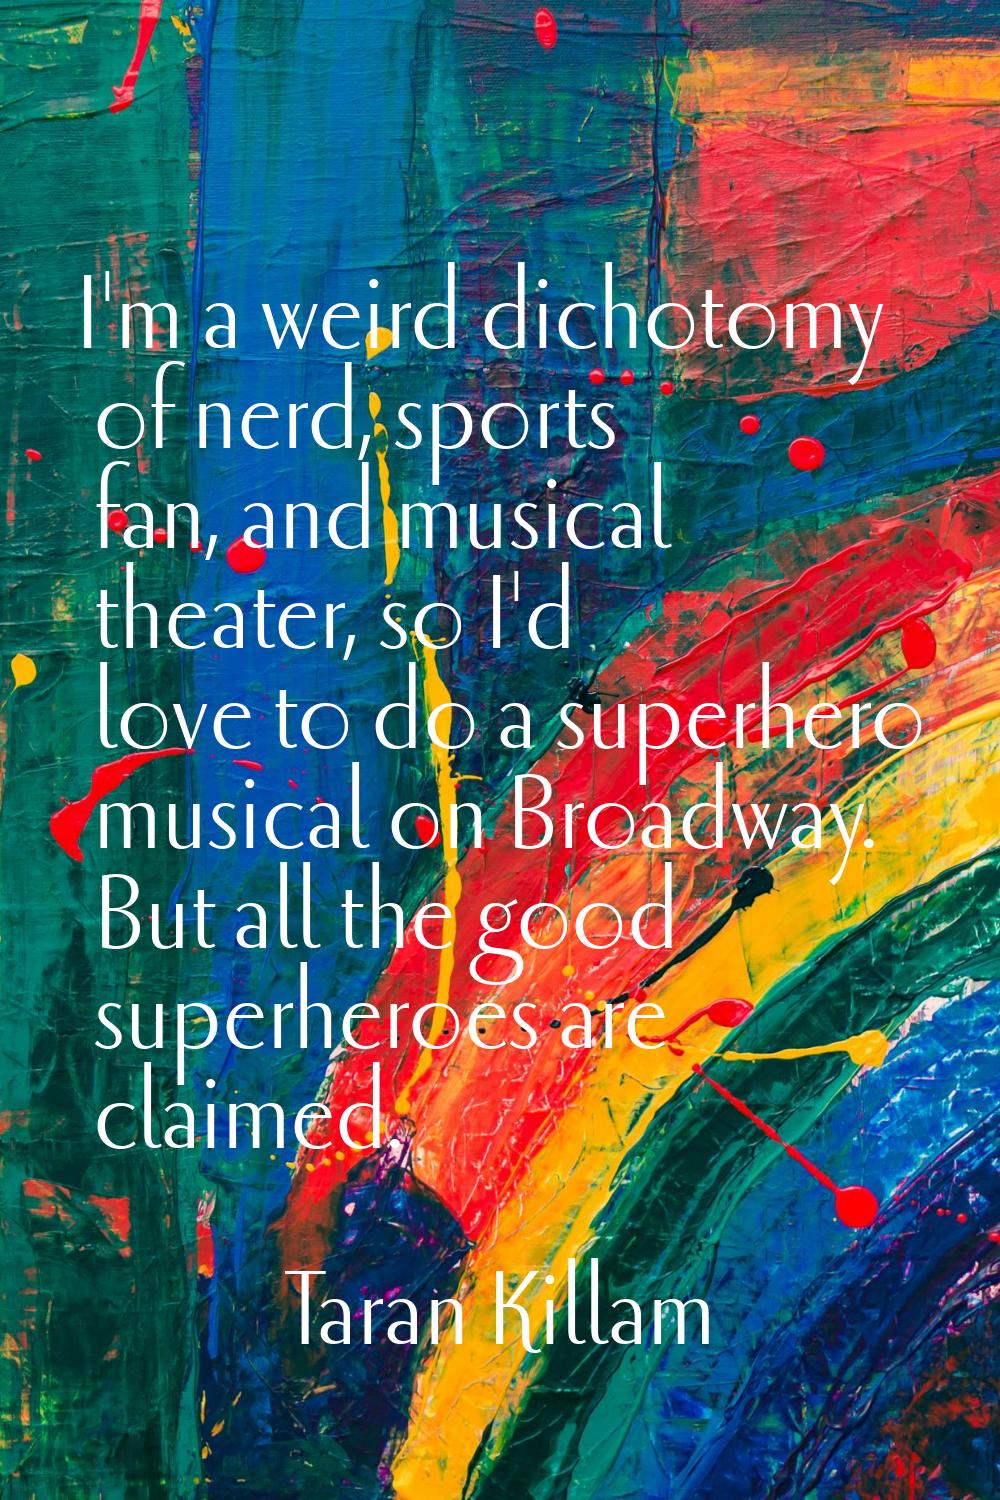 I'm a weird dichotomy of nerd, sports fan, and musical theater, so I'd love to do a superhero music